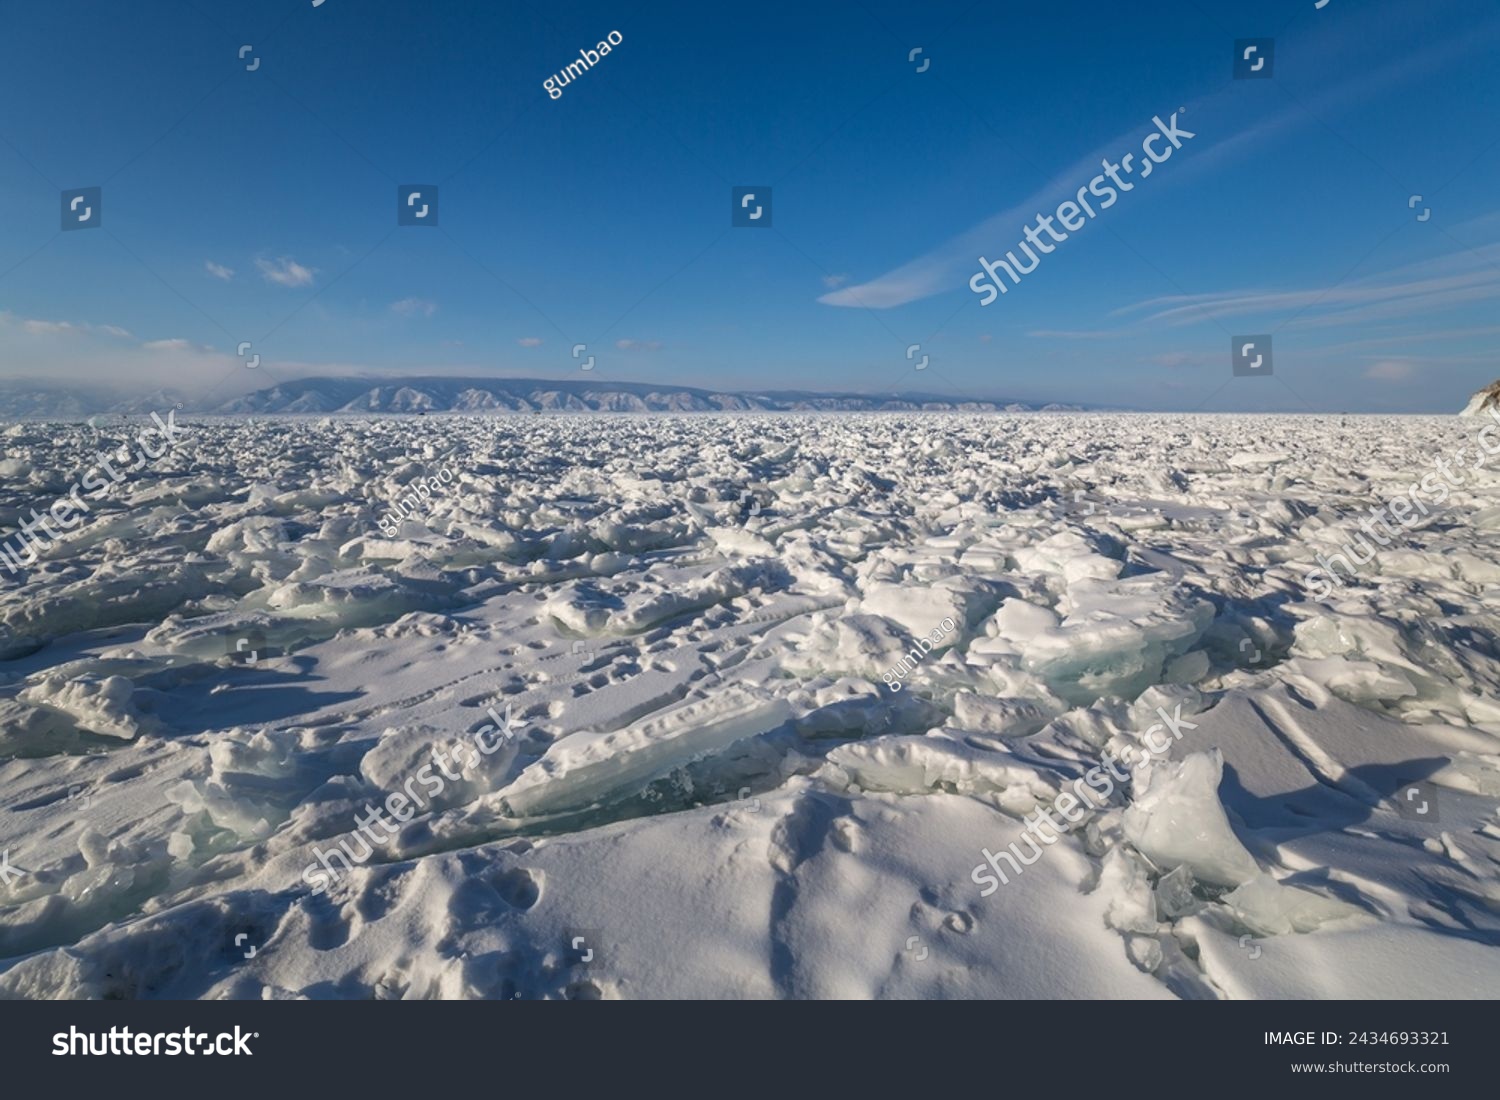 Lake Baikal in winter, the deepest and largest freshwater lake by volume in the world, located in southern Siberia, Russia #2434693321